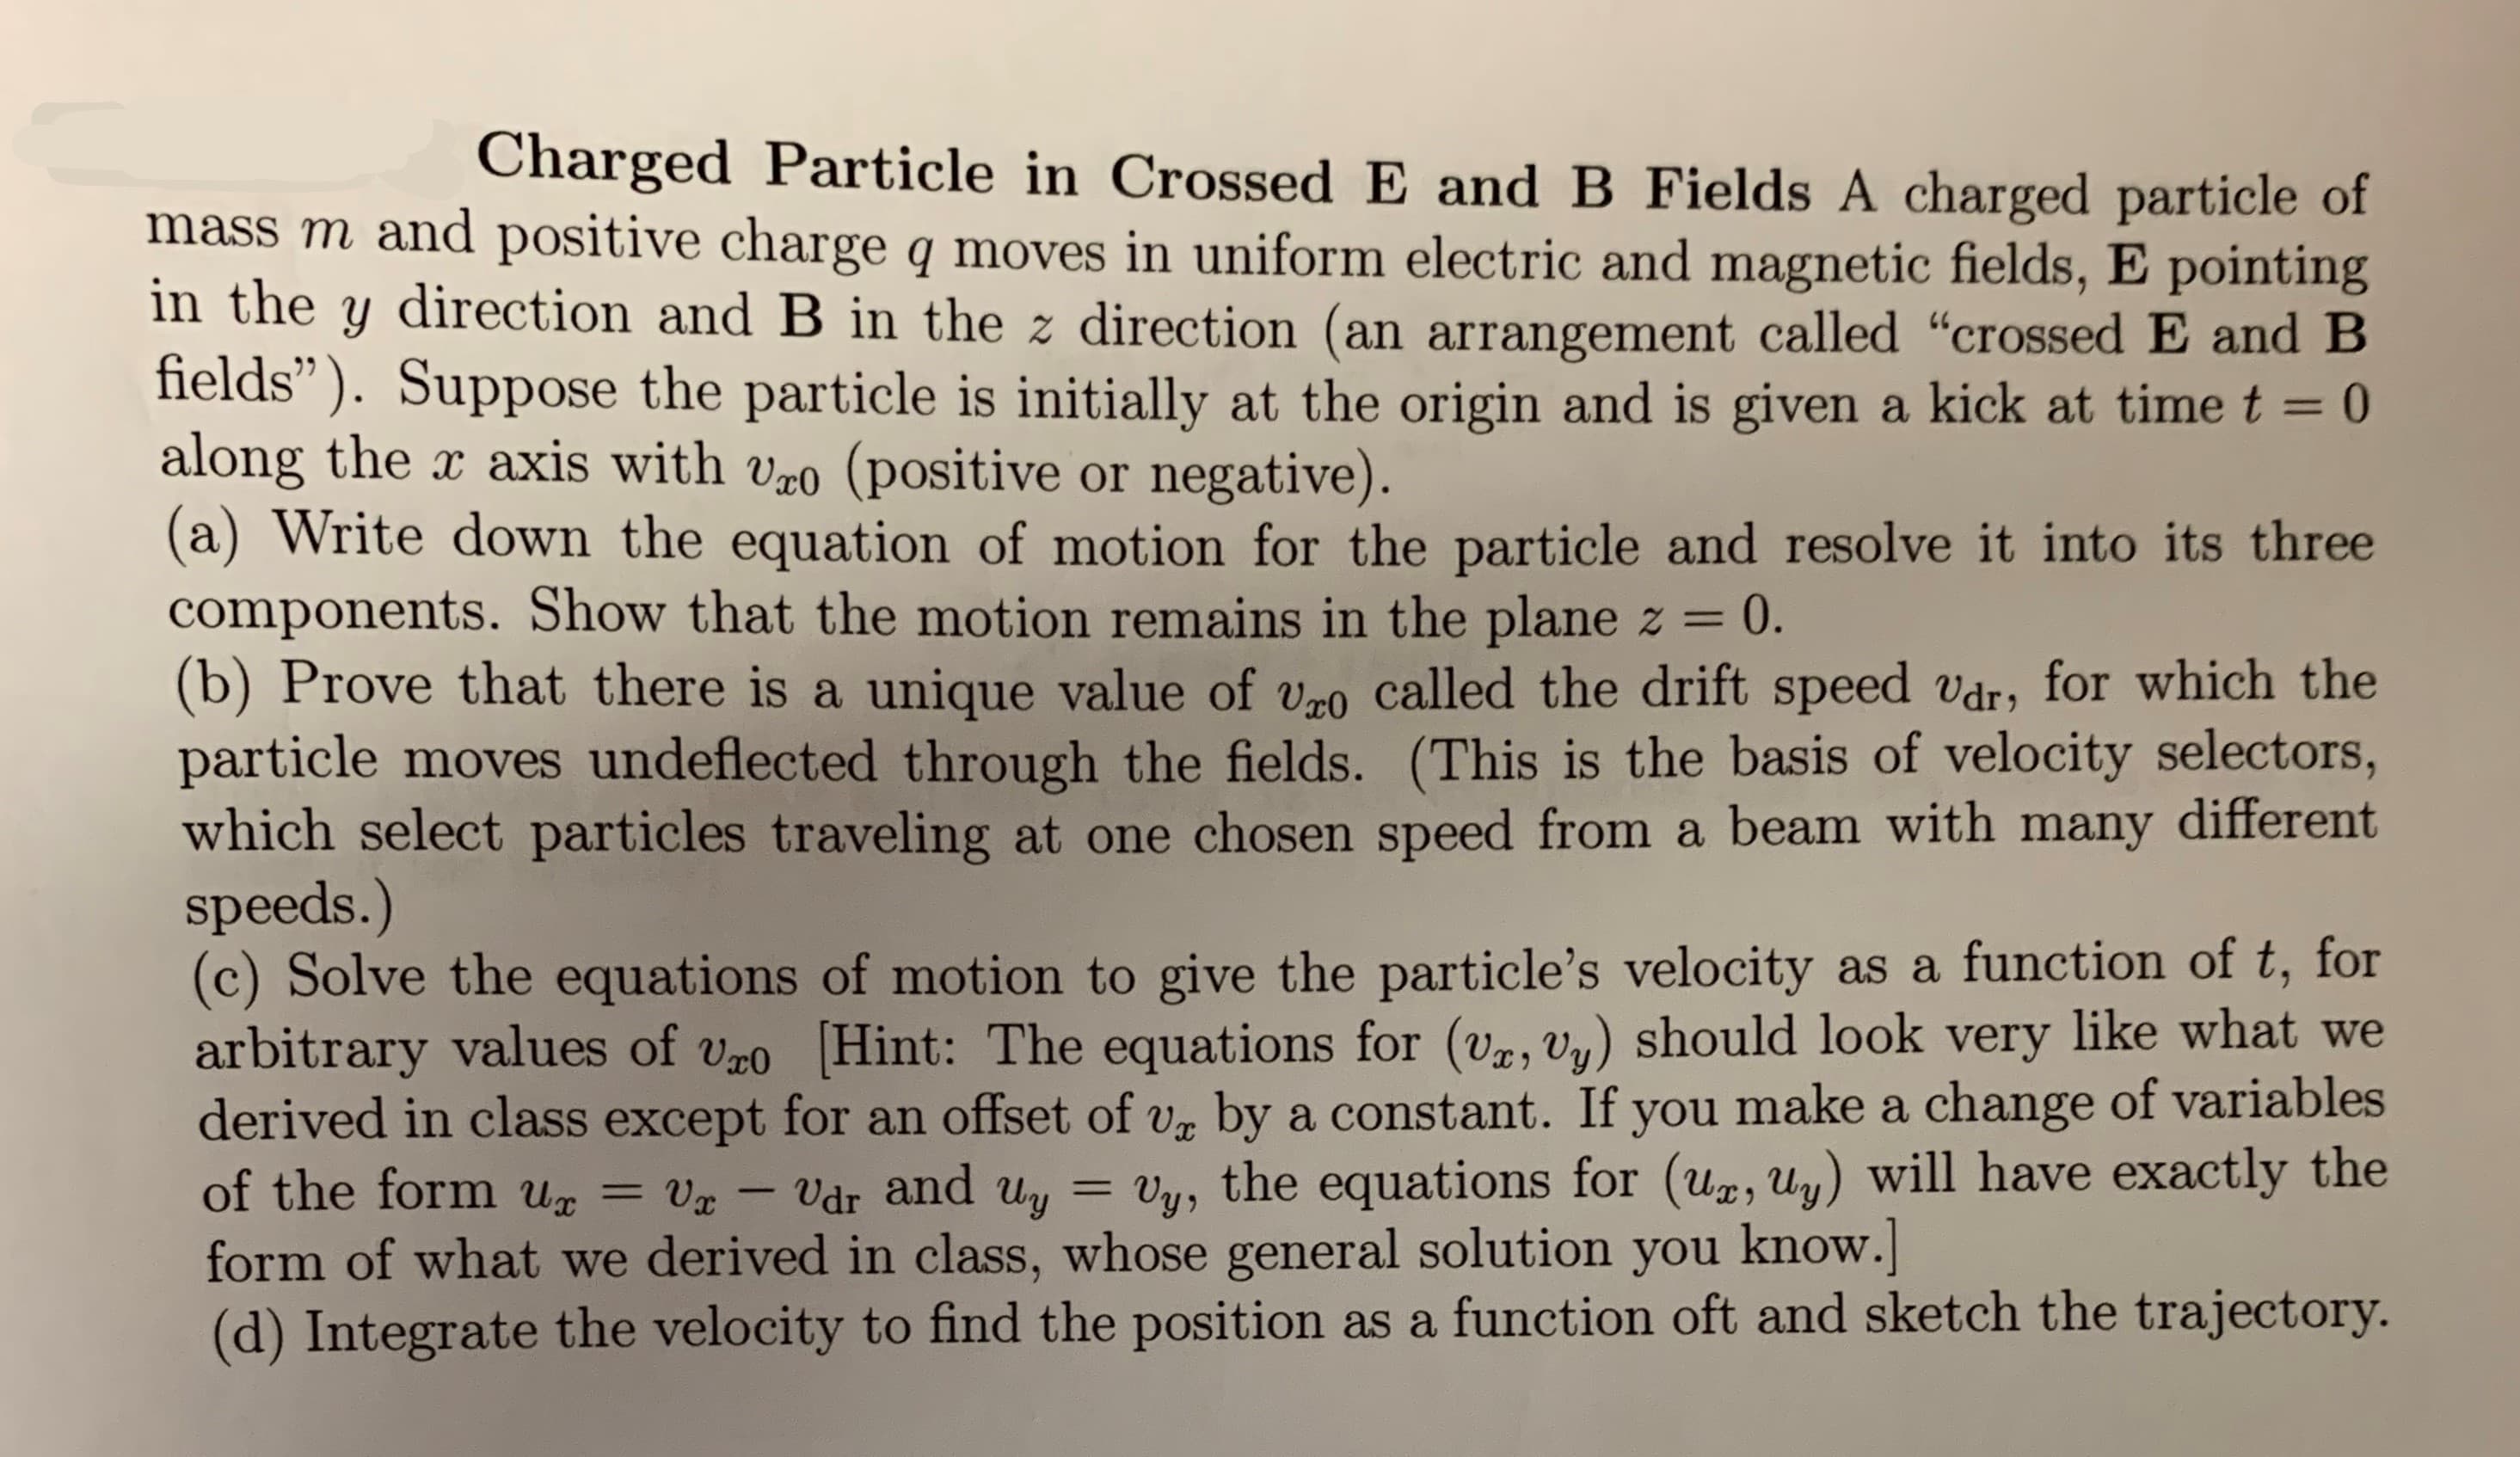 Charged Particle in Crossed E and B Fields A charged particle of
mass m and positive charge q moves in uniform electric and magnetic fields, E pointing
in the y direction and B in the z direction (an arrangement called "crossed E and B
fields"). Suppose the particle is initially at the origin and is given a kick at time t = 0
along the x axis with vo (positive or negative)
(a) Write down the equation of motion for the particle and resolve it into its three
components. Show that the motion remains in the plane
(b) Prove that there is a unique value of vgo called the drift speed
particle moves undeflected through the fields. (This is the basis of velocity selectors,
which select particles traveling at one chosen speed from a beam with many different
speeds.)
(c) Solve the equations of motion to give the particle's velocity as a function of t, for
arbitrary values of vo Hint: The equations for (va, Uy) should look very like what we
derived in class except for an offset of v by a constant. If you make a change of variables
of the form Un
0.
2
vdr, for which the
Vdr and uy = vy, the equations for (ug, uy) will have exactly the
Vx
form of what we derived in class, whose general solution you know.
(d) Integrate the velocity to find the position as a function oft and sketch the trajectory.
